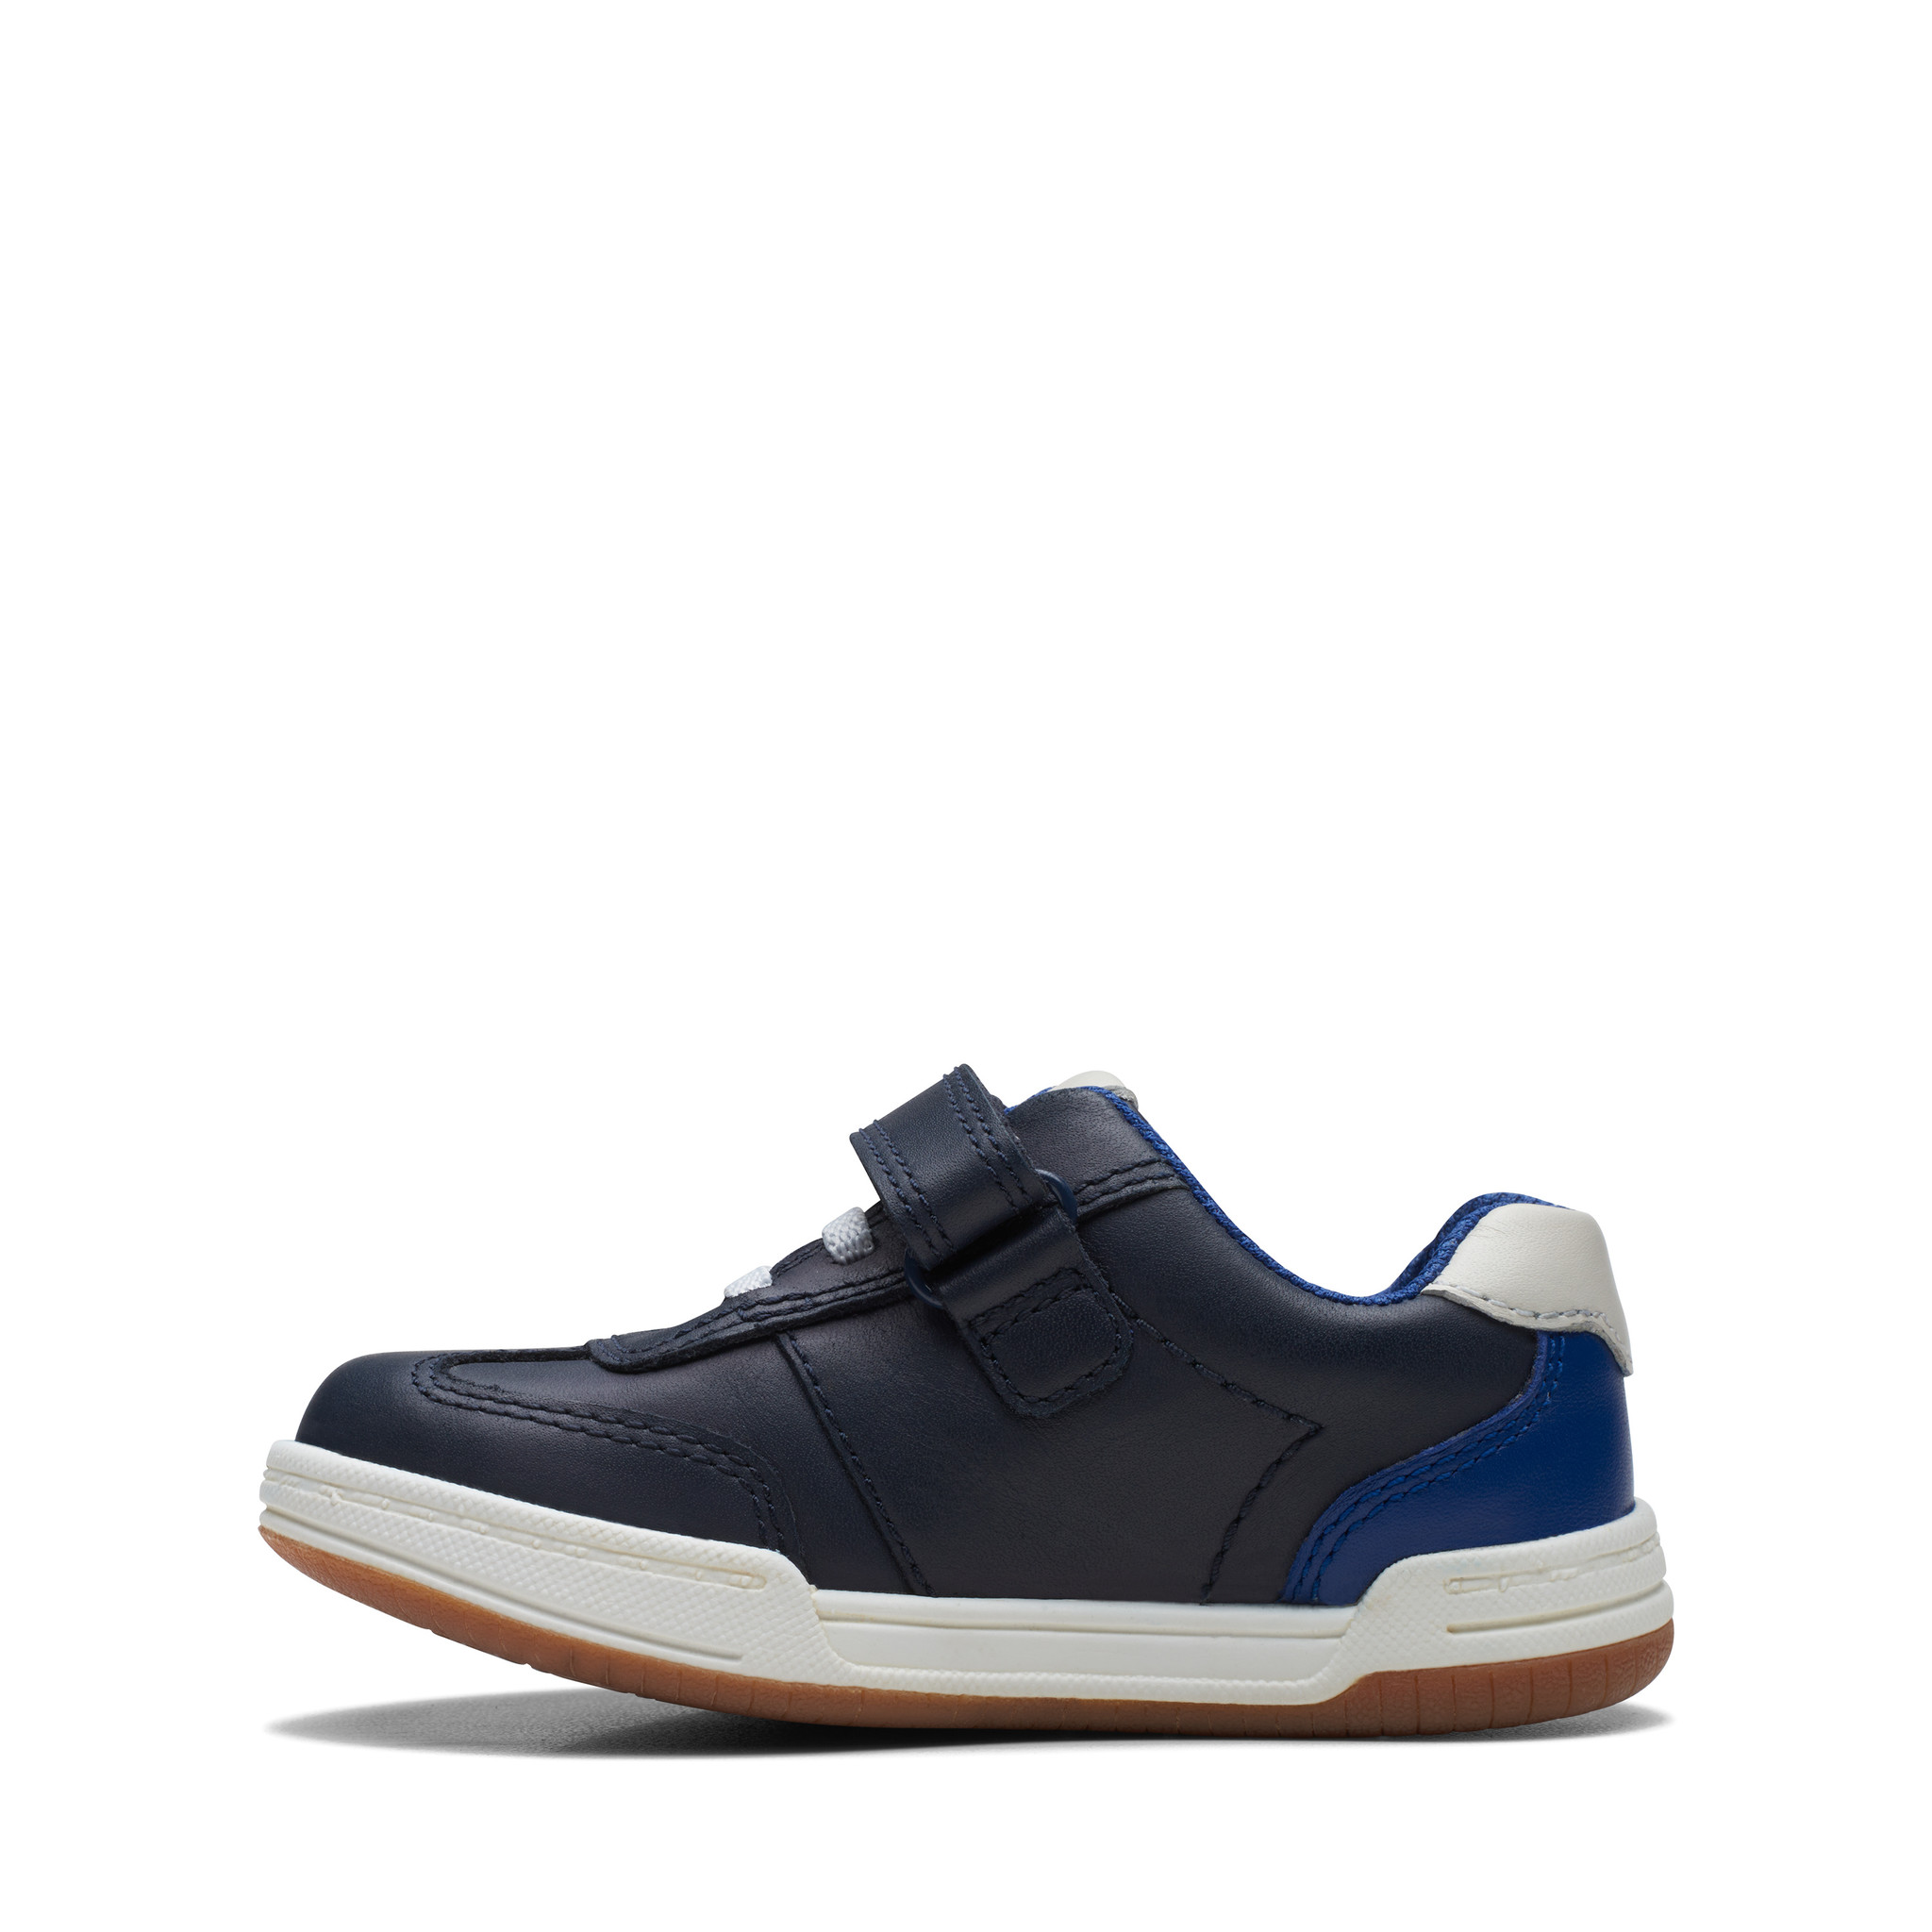 Clarks Fawn Family Navy Combi Infant